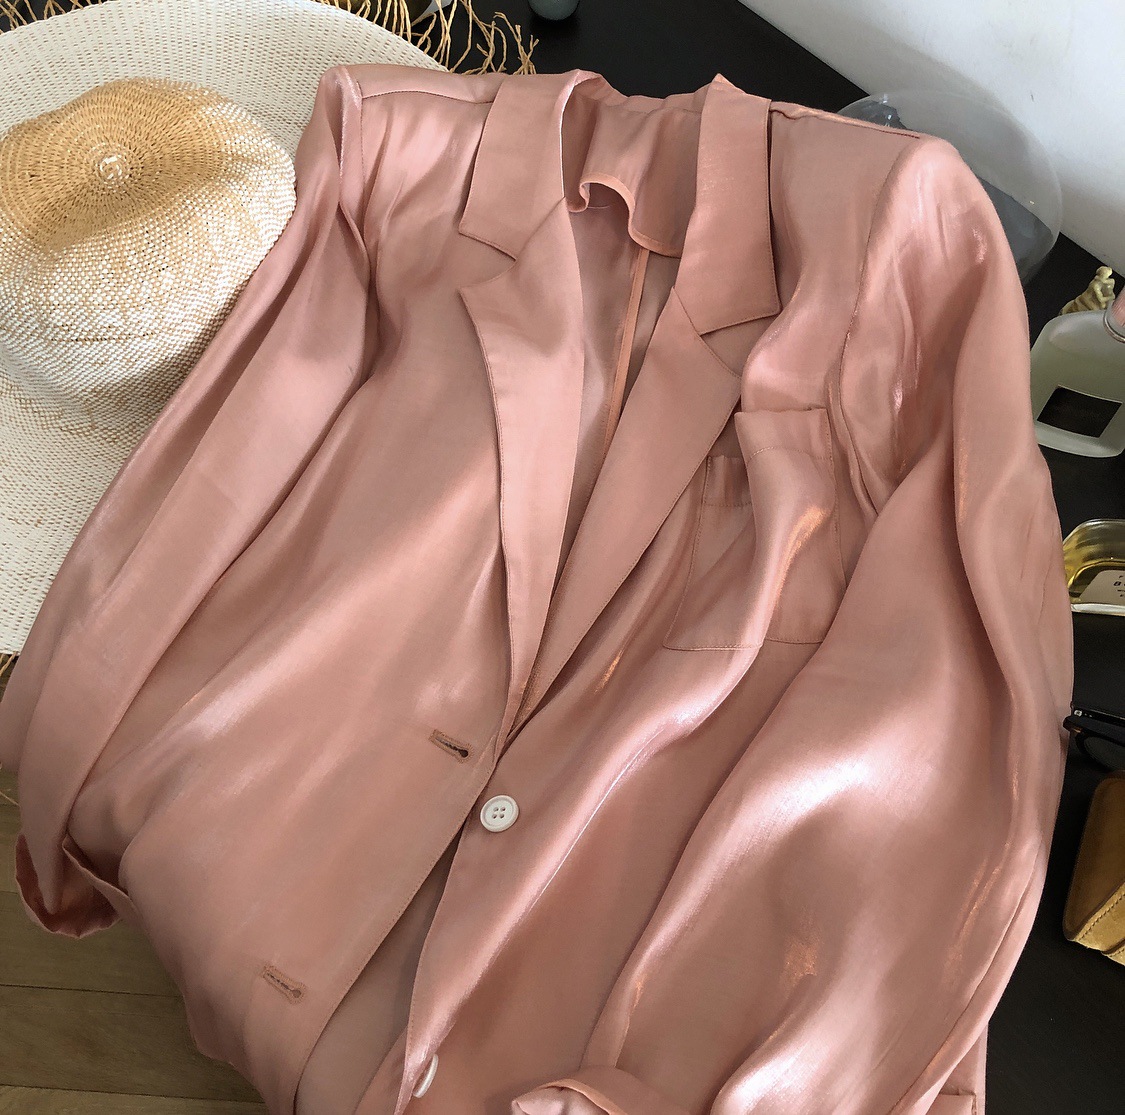 DEAT 2021 New Spring And Summer Notched Collar Full Sleeves Satin Fabtric Single Breasted Blazer Female top WM14911